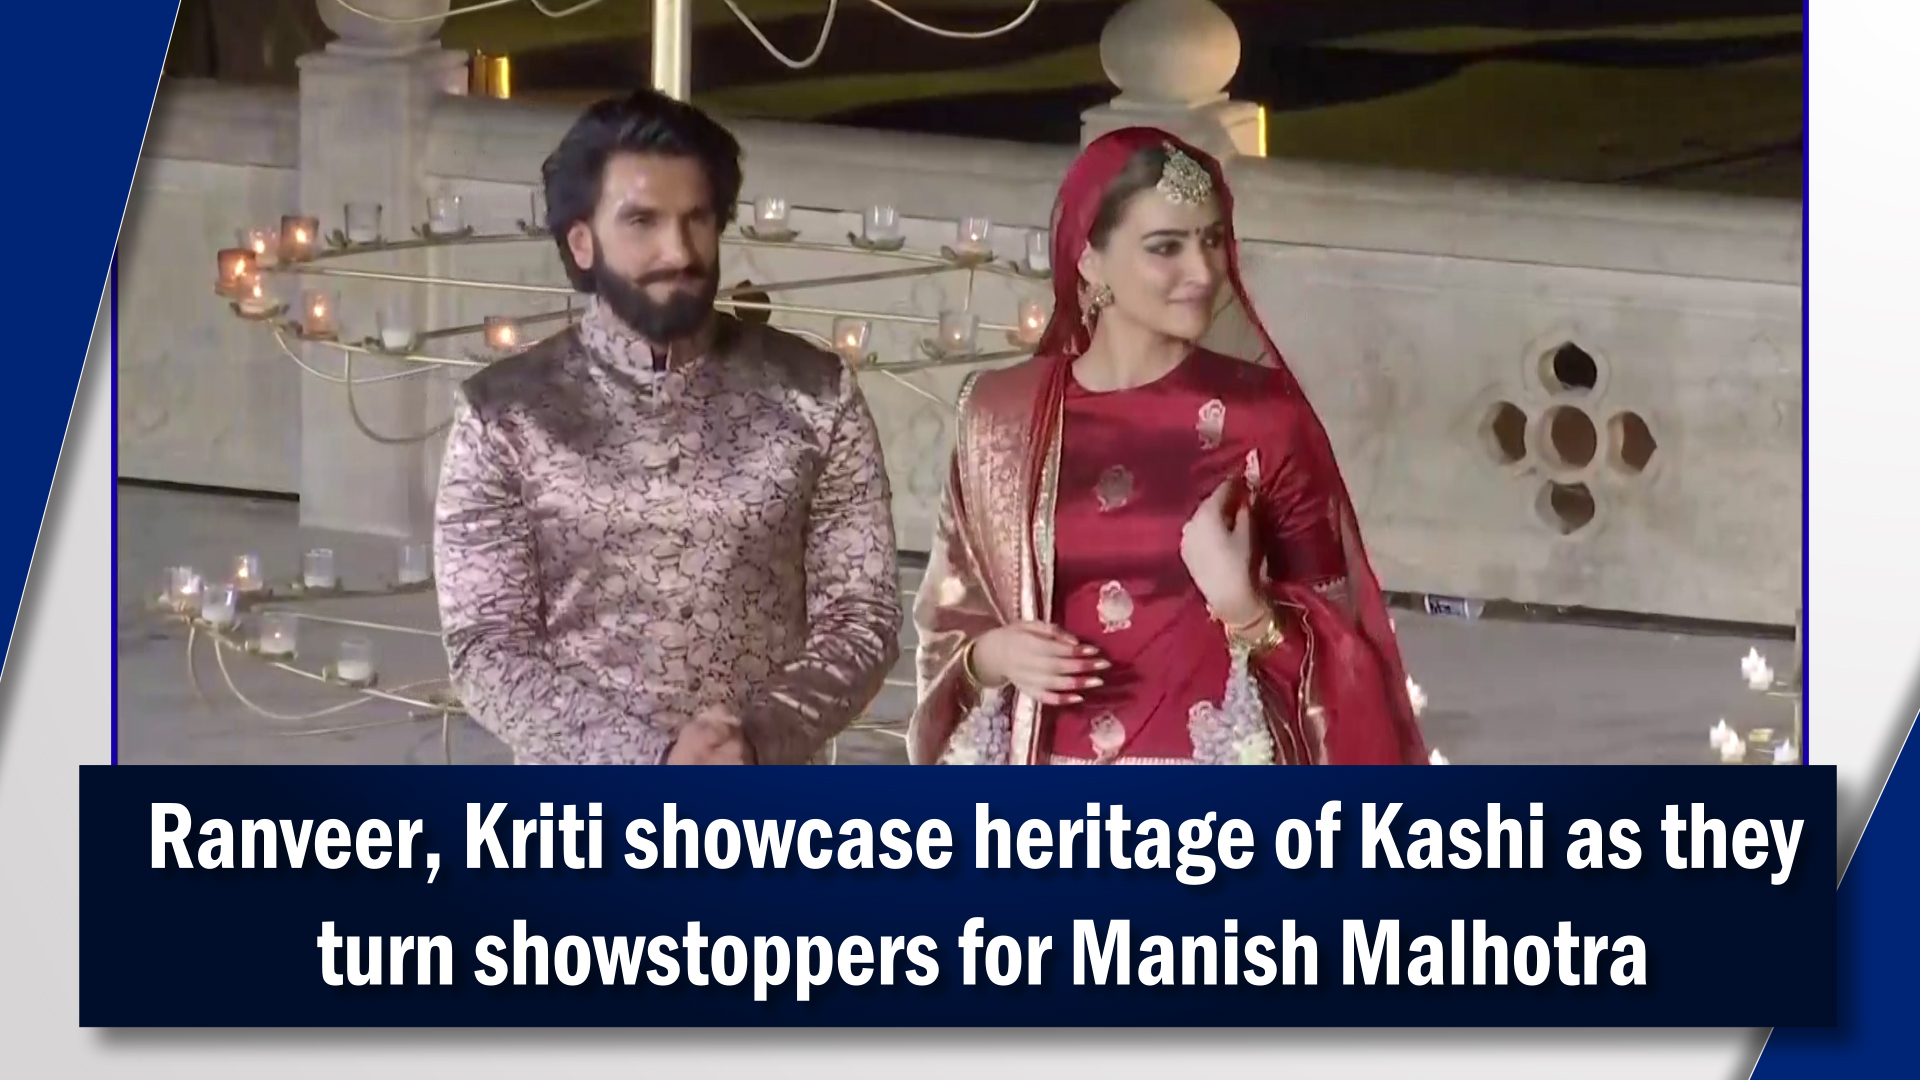 Ranveer, Kriti showcase heritage of Kashi as they turn showstoppers for Manish Malhotra